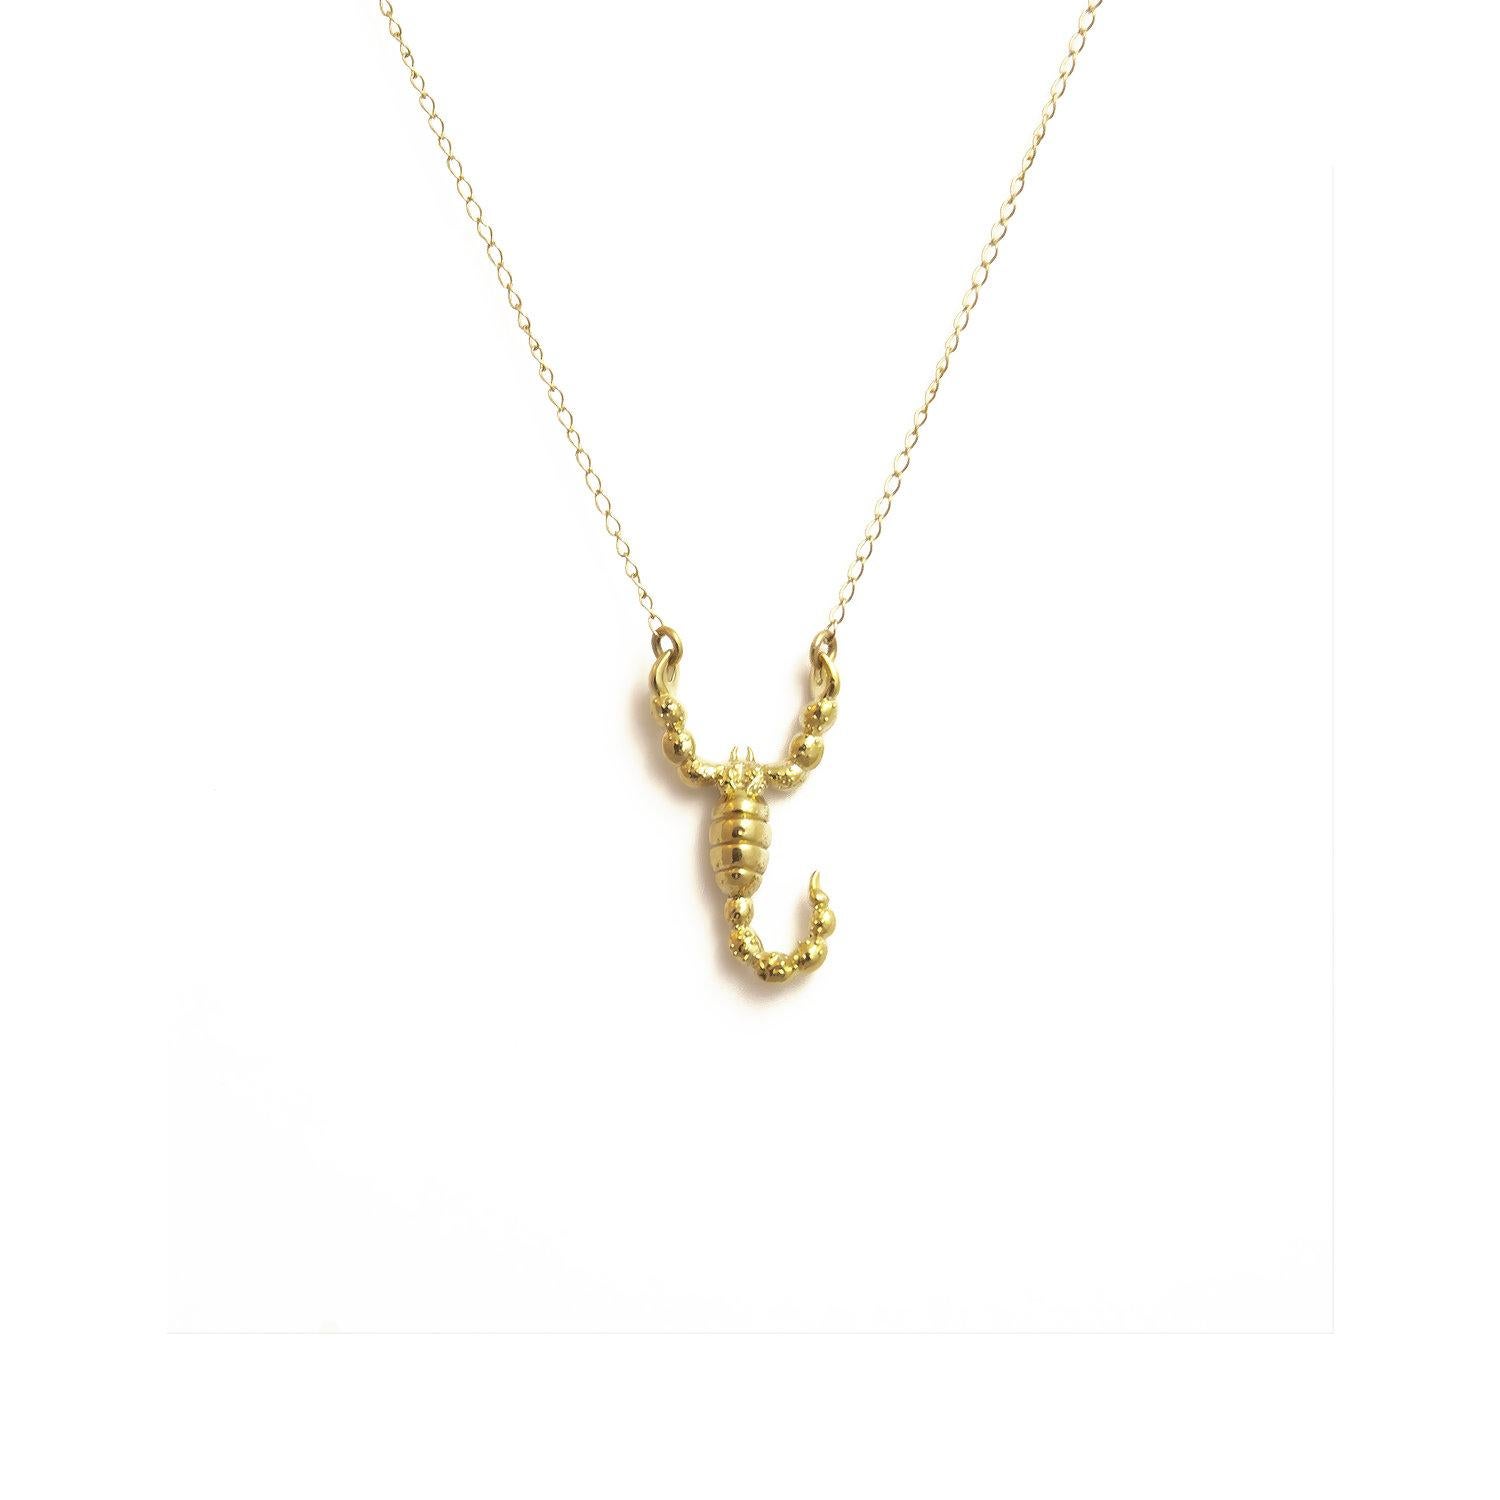 Artist JHERWITT 14k Solid Gold Small Scorpion Pendant  Necklace For Sale